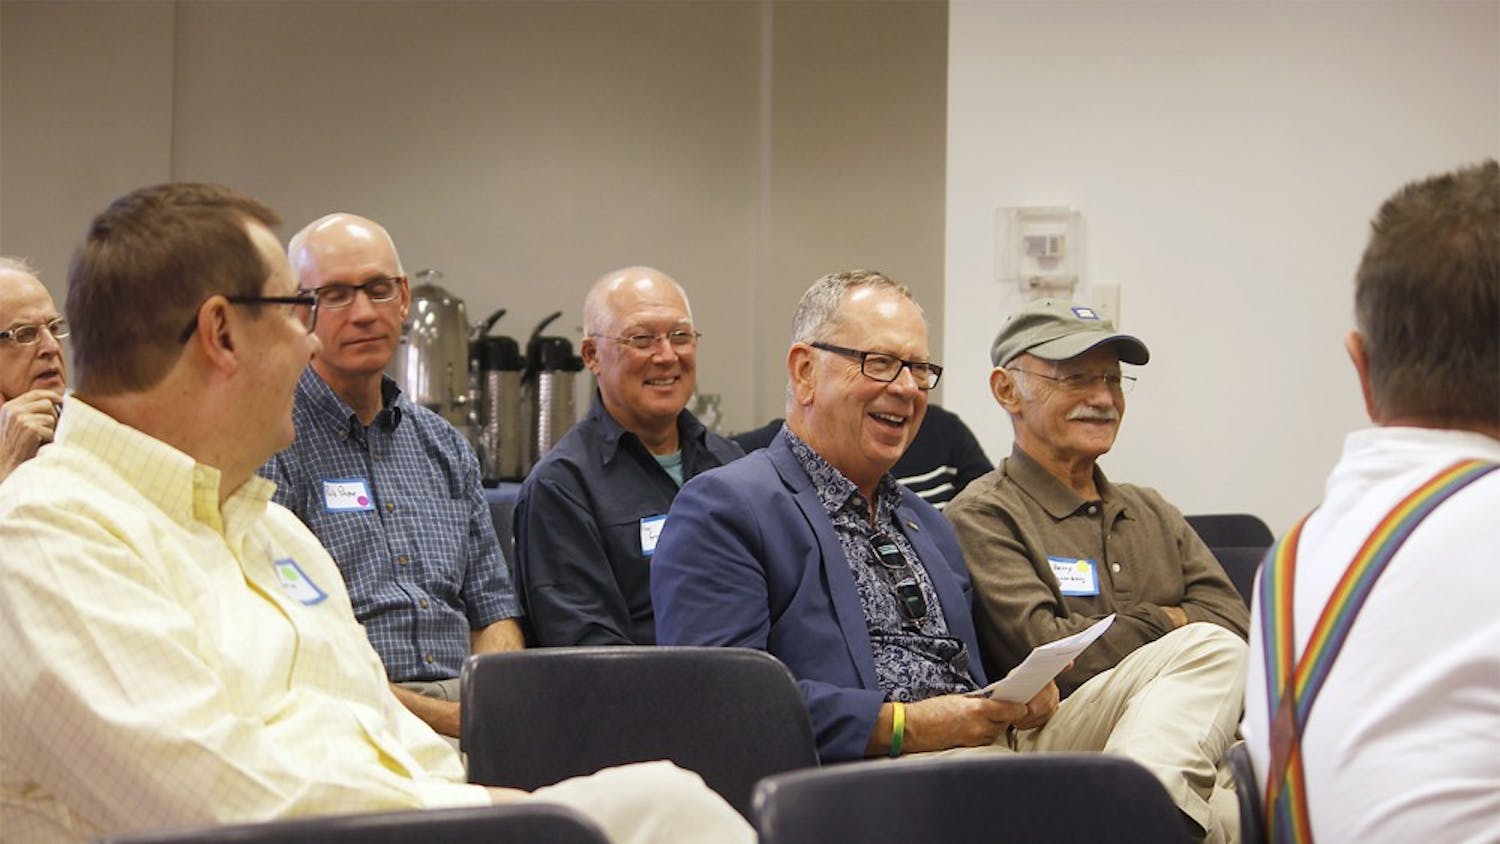 Supporters of the Carolina Gay Association gathered on Saturday to celebrate the 40th reunion of the organization.